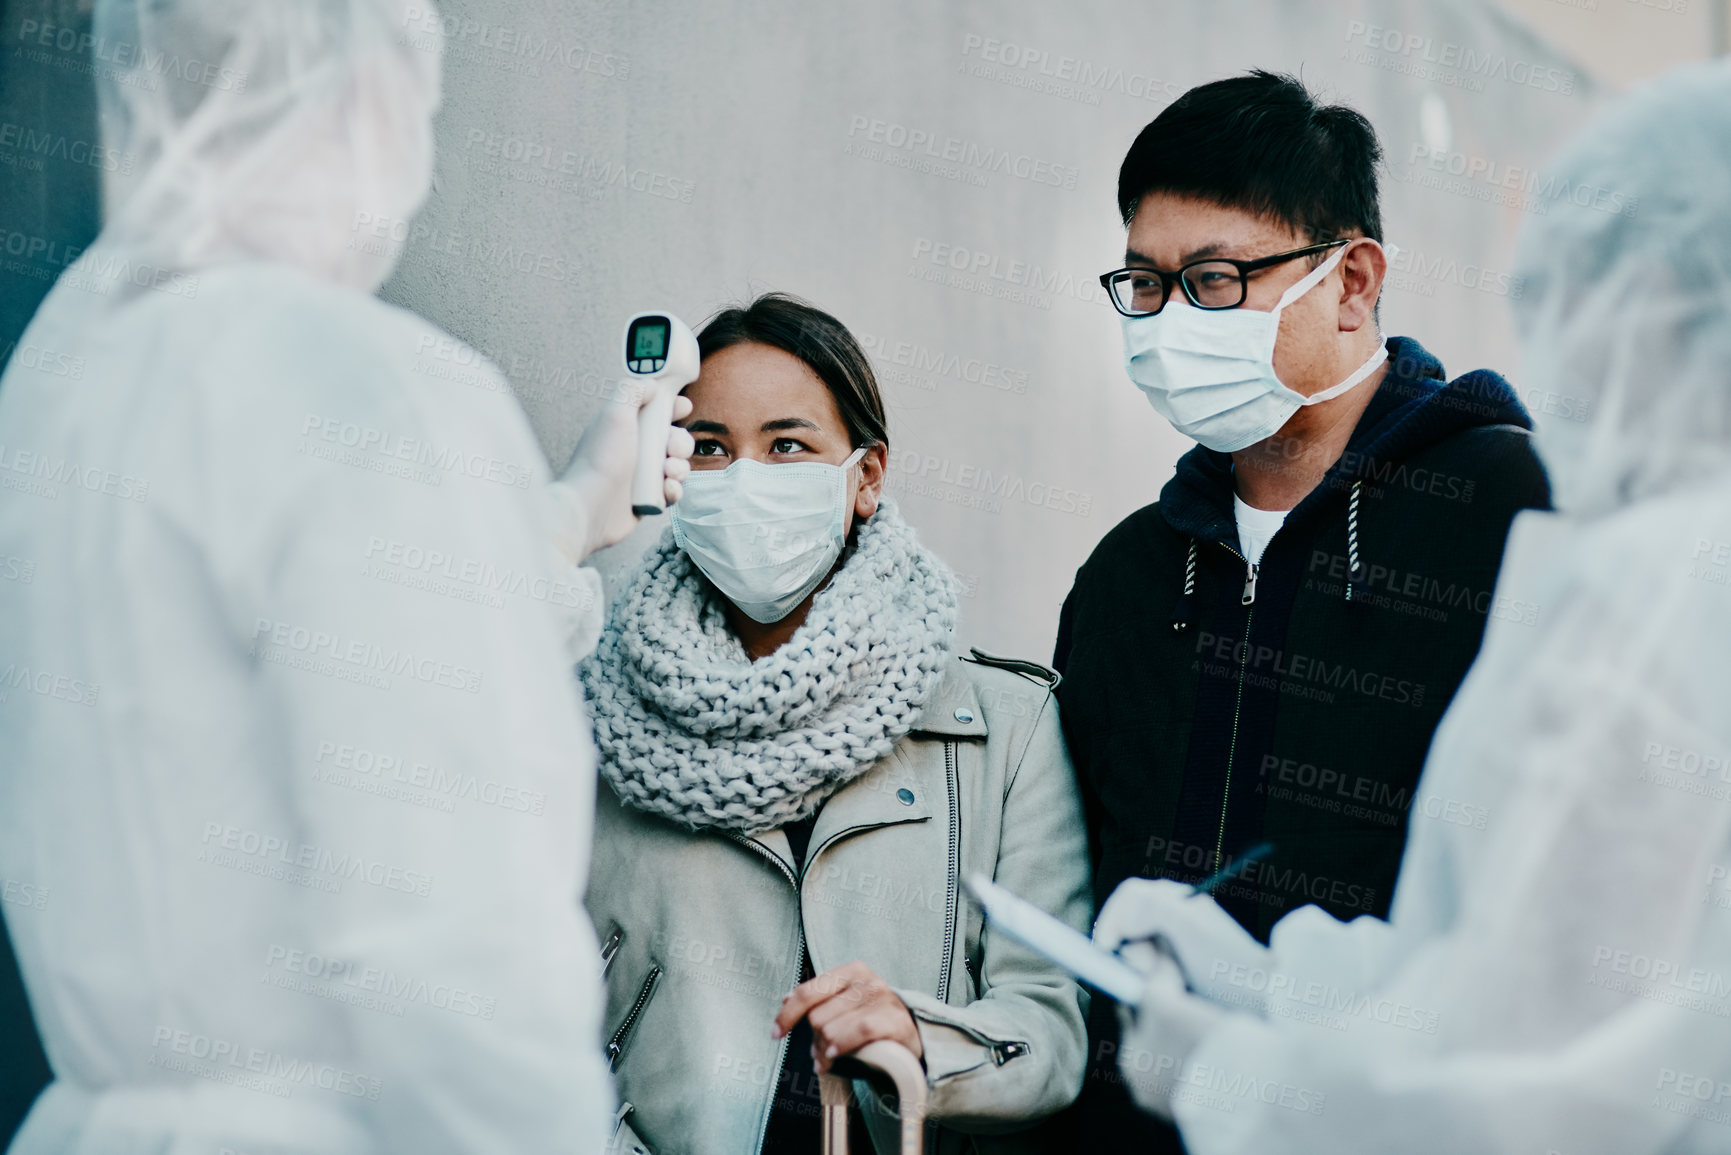 Buy stock photo Traveling couple getting a covid temperature scan at the border with medical security doing screening test for safety during pandemic. Foreign people or traveler arriving at an airport with face mask